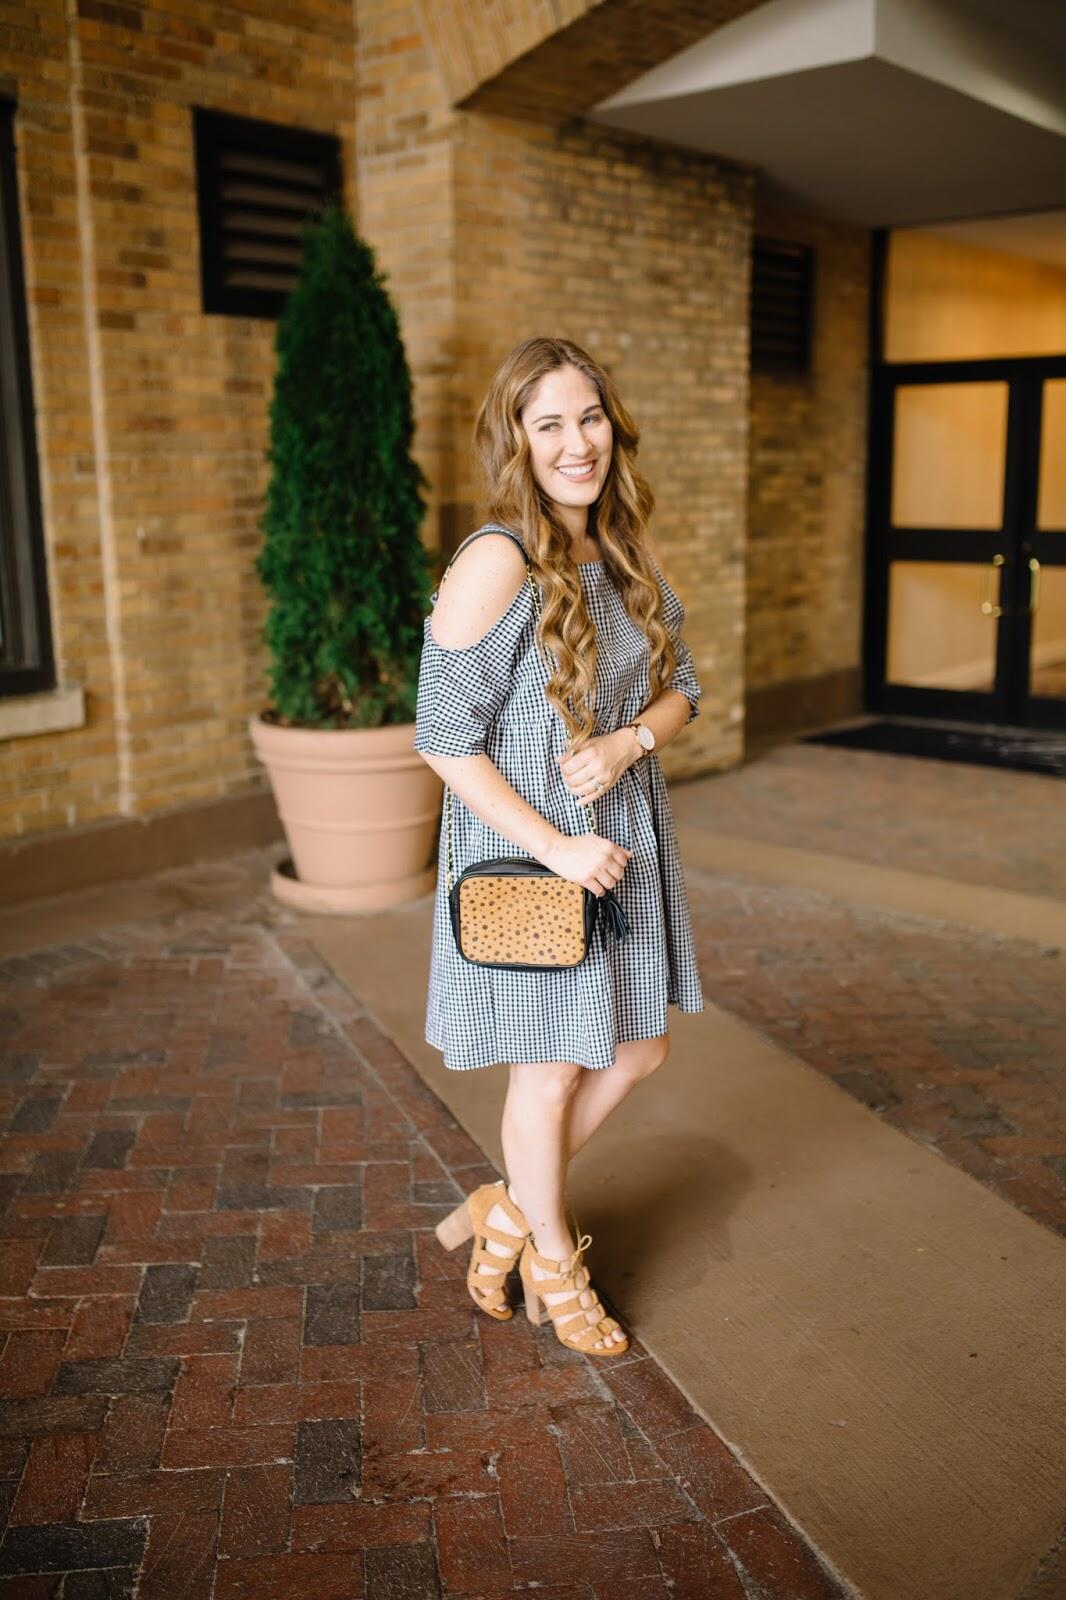 Trend Spin Linkup - Summer Looks by fashion blogger Laura of Walking in Memphis in High Heels